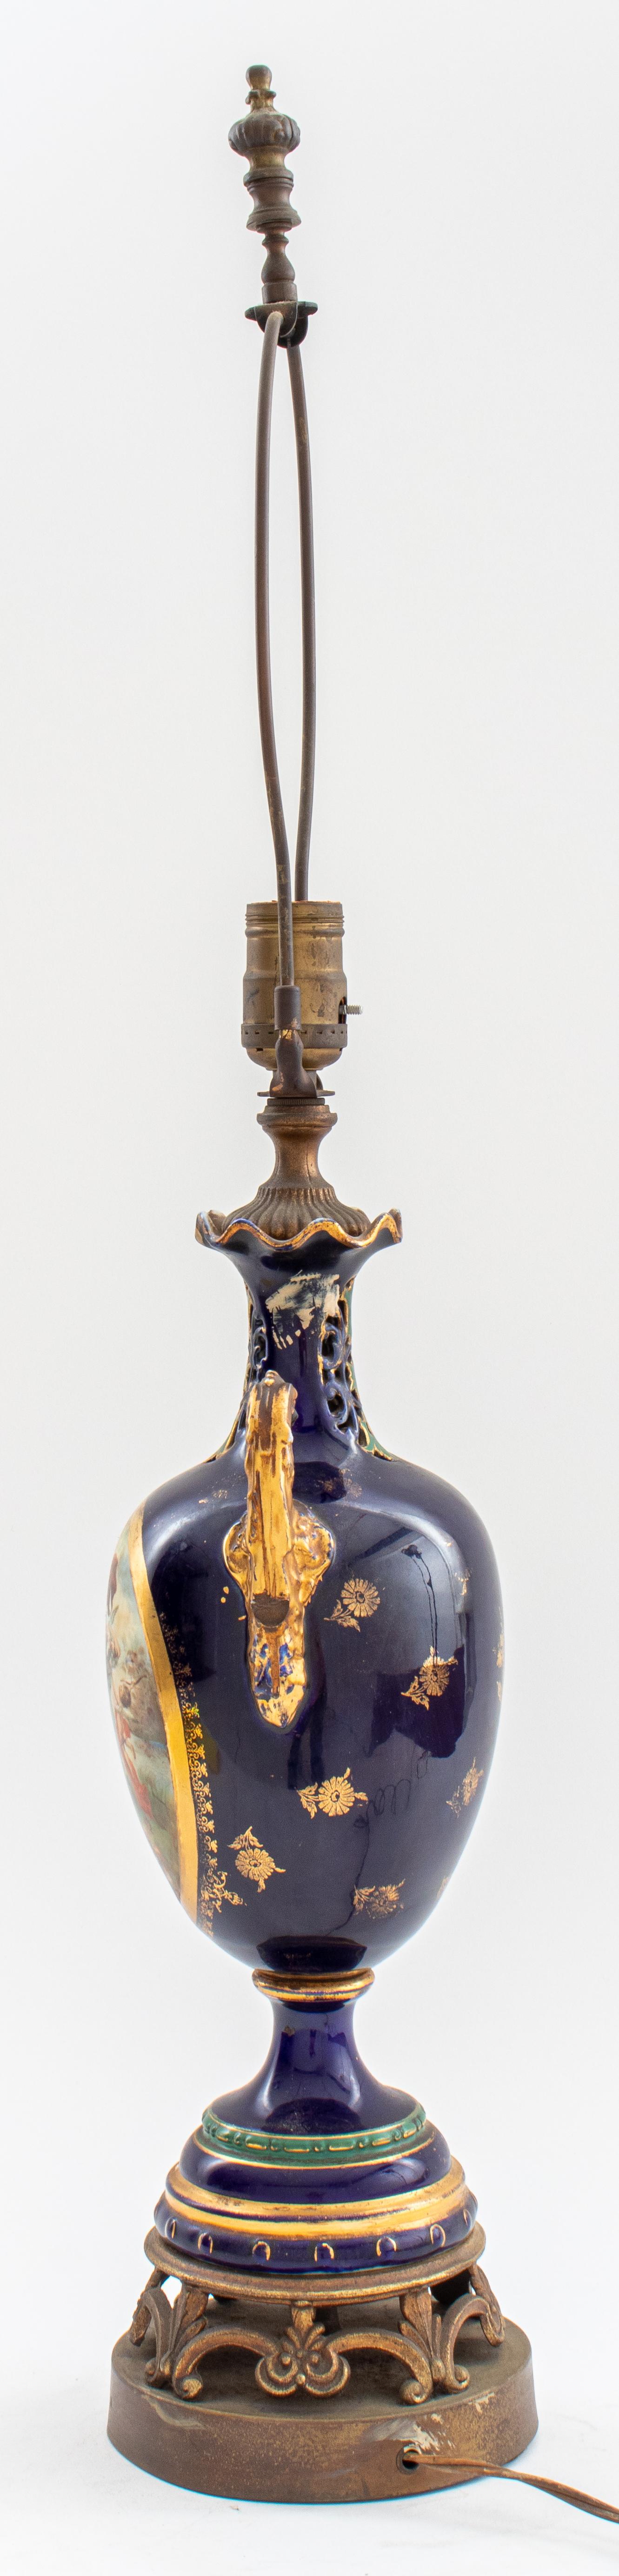 Porcelain Sevres Style Vase Mounted as a Lamp